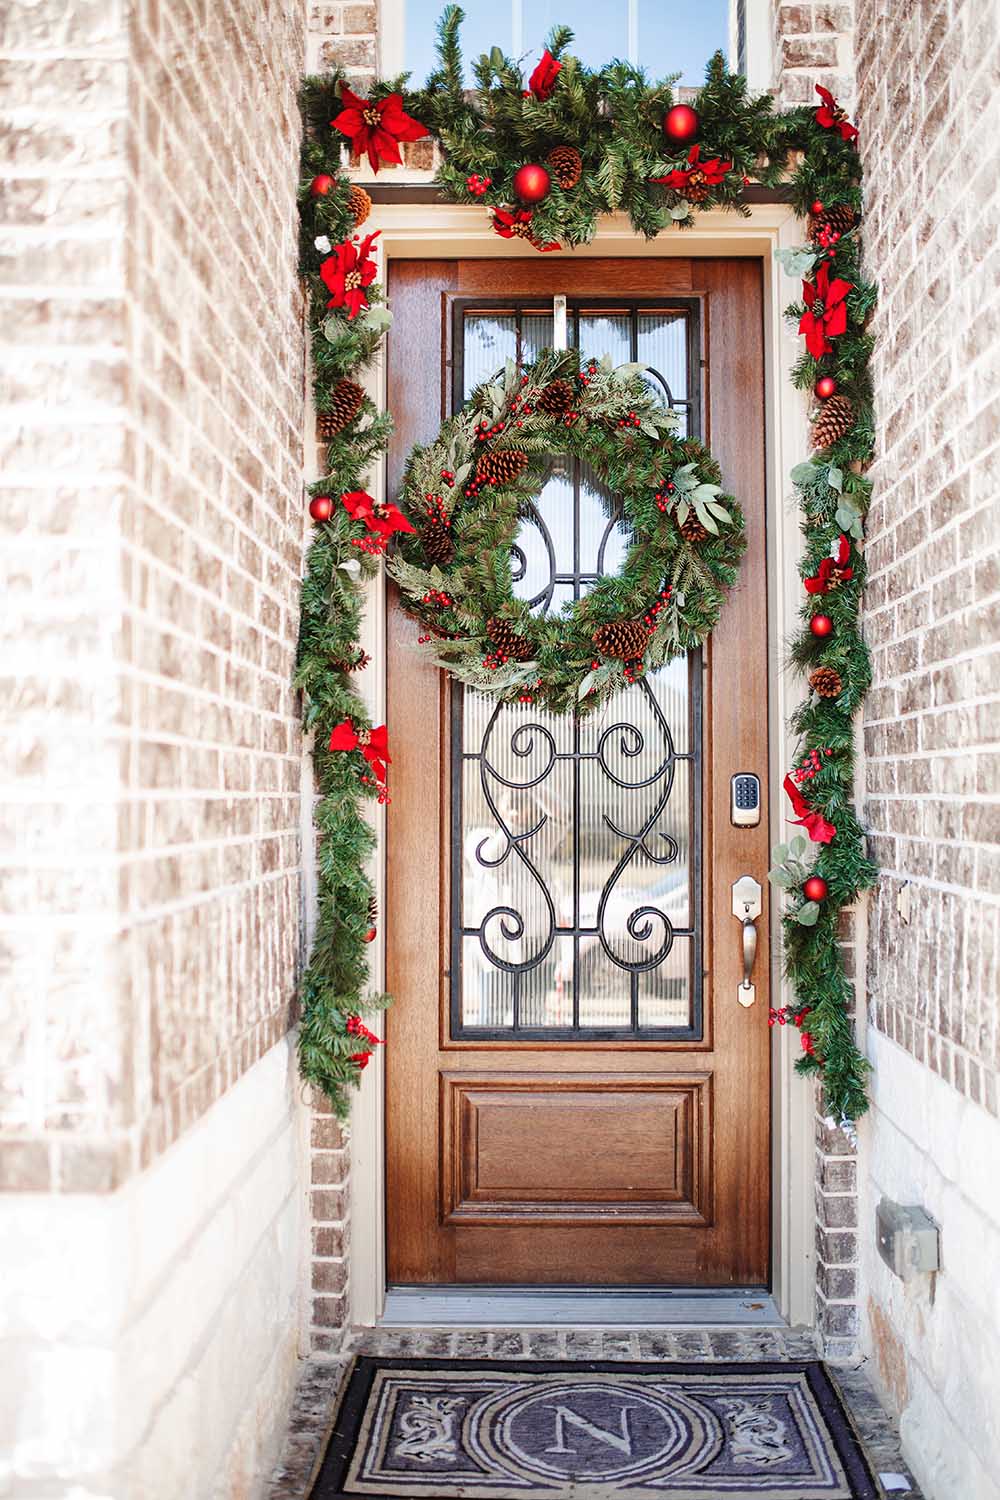 A monogrammed doormat sitting in front of a holiday decorated front door.